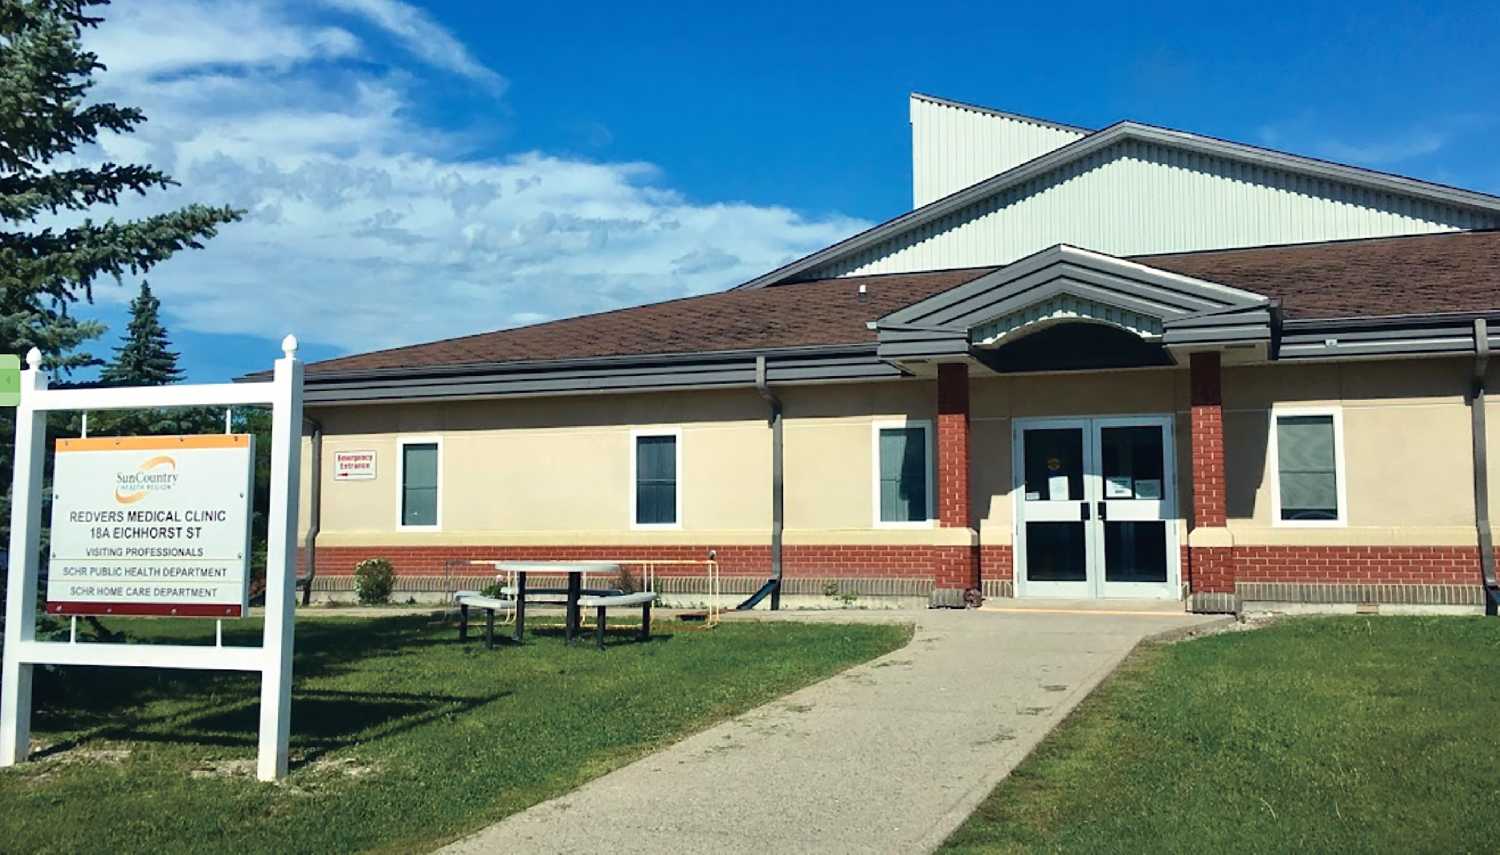 The 24-hour emergency service and acute care services at the Redvers Health Centre have been closed since September 24 and the town is pushing to have it reopened as soon as possible.